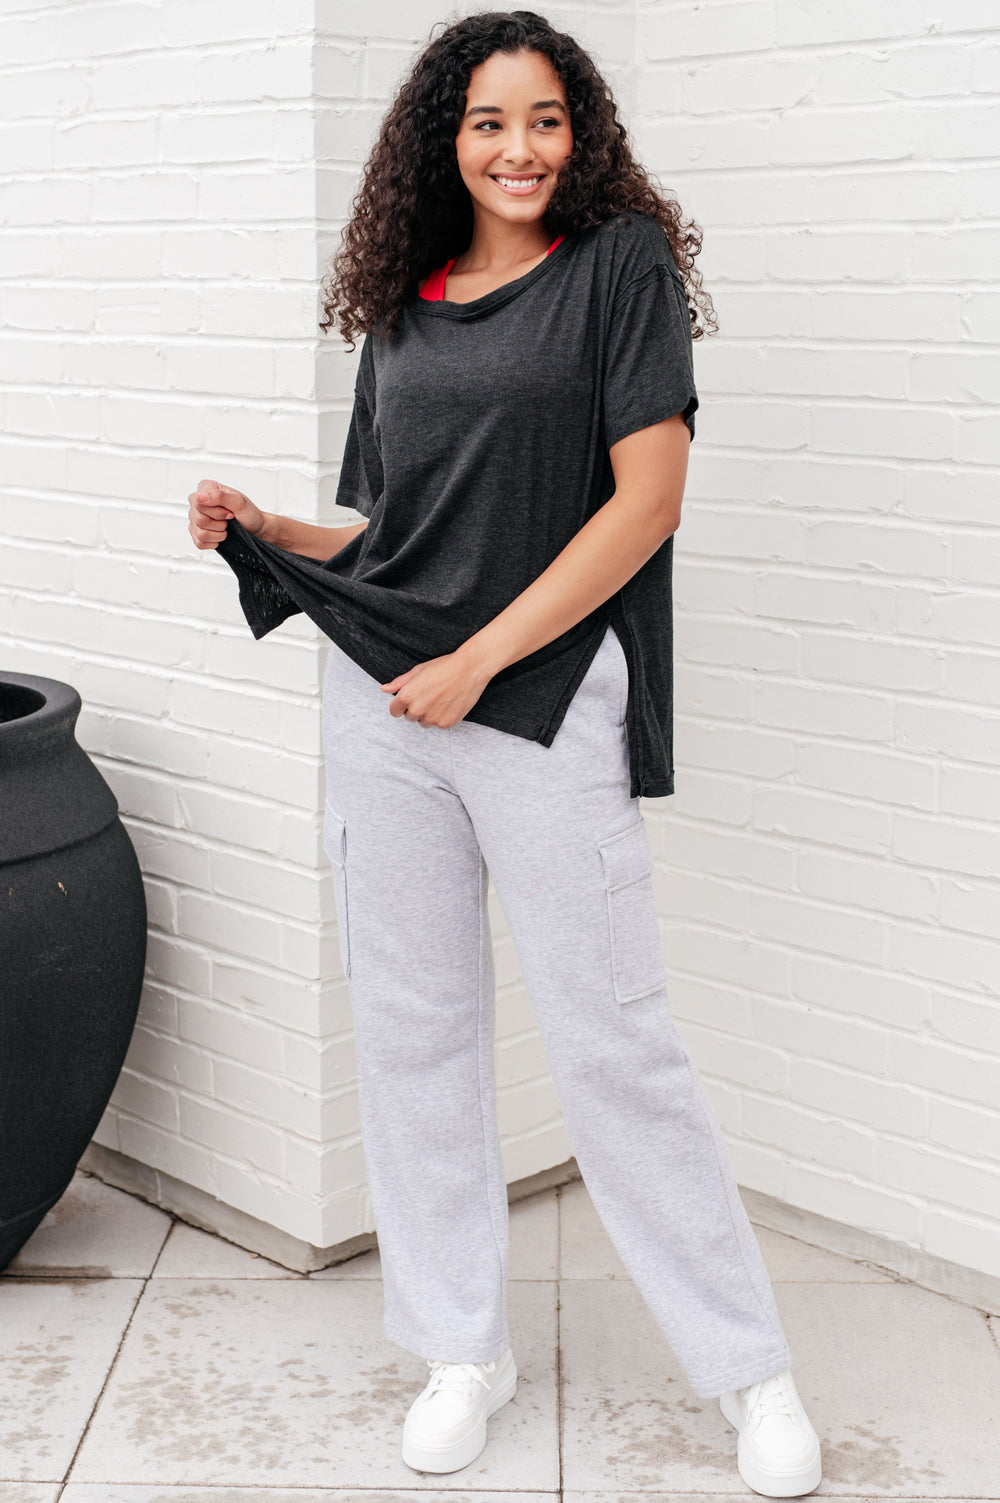 Let Me Live Relaxed Tee in Black-Short Sleeve Tops-Inspired by Justeen-Women's Clothing Boutique in Chicago, Illinois